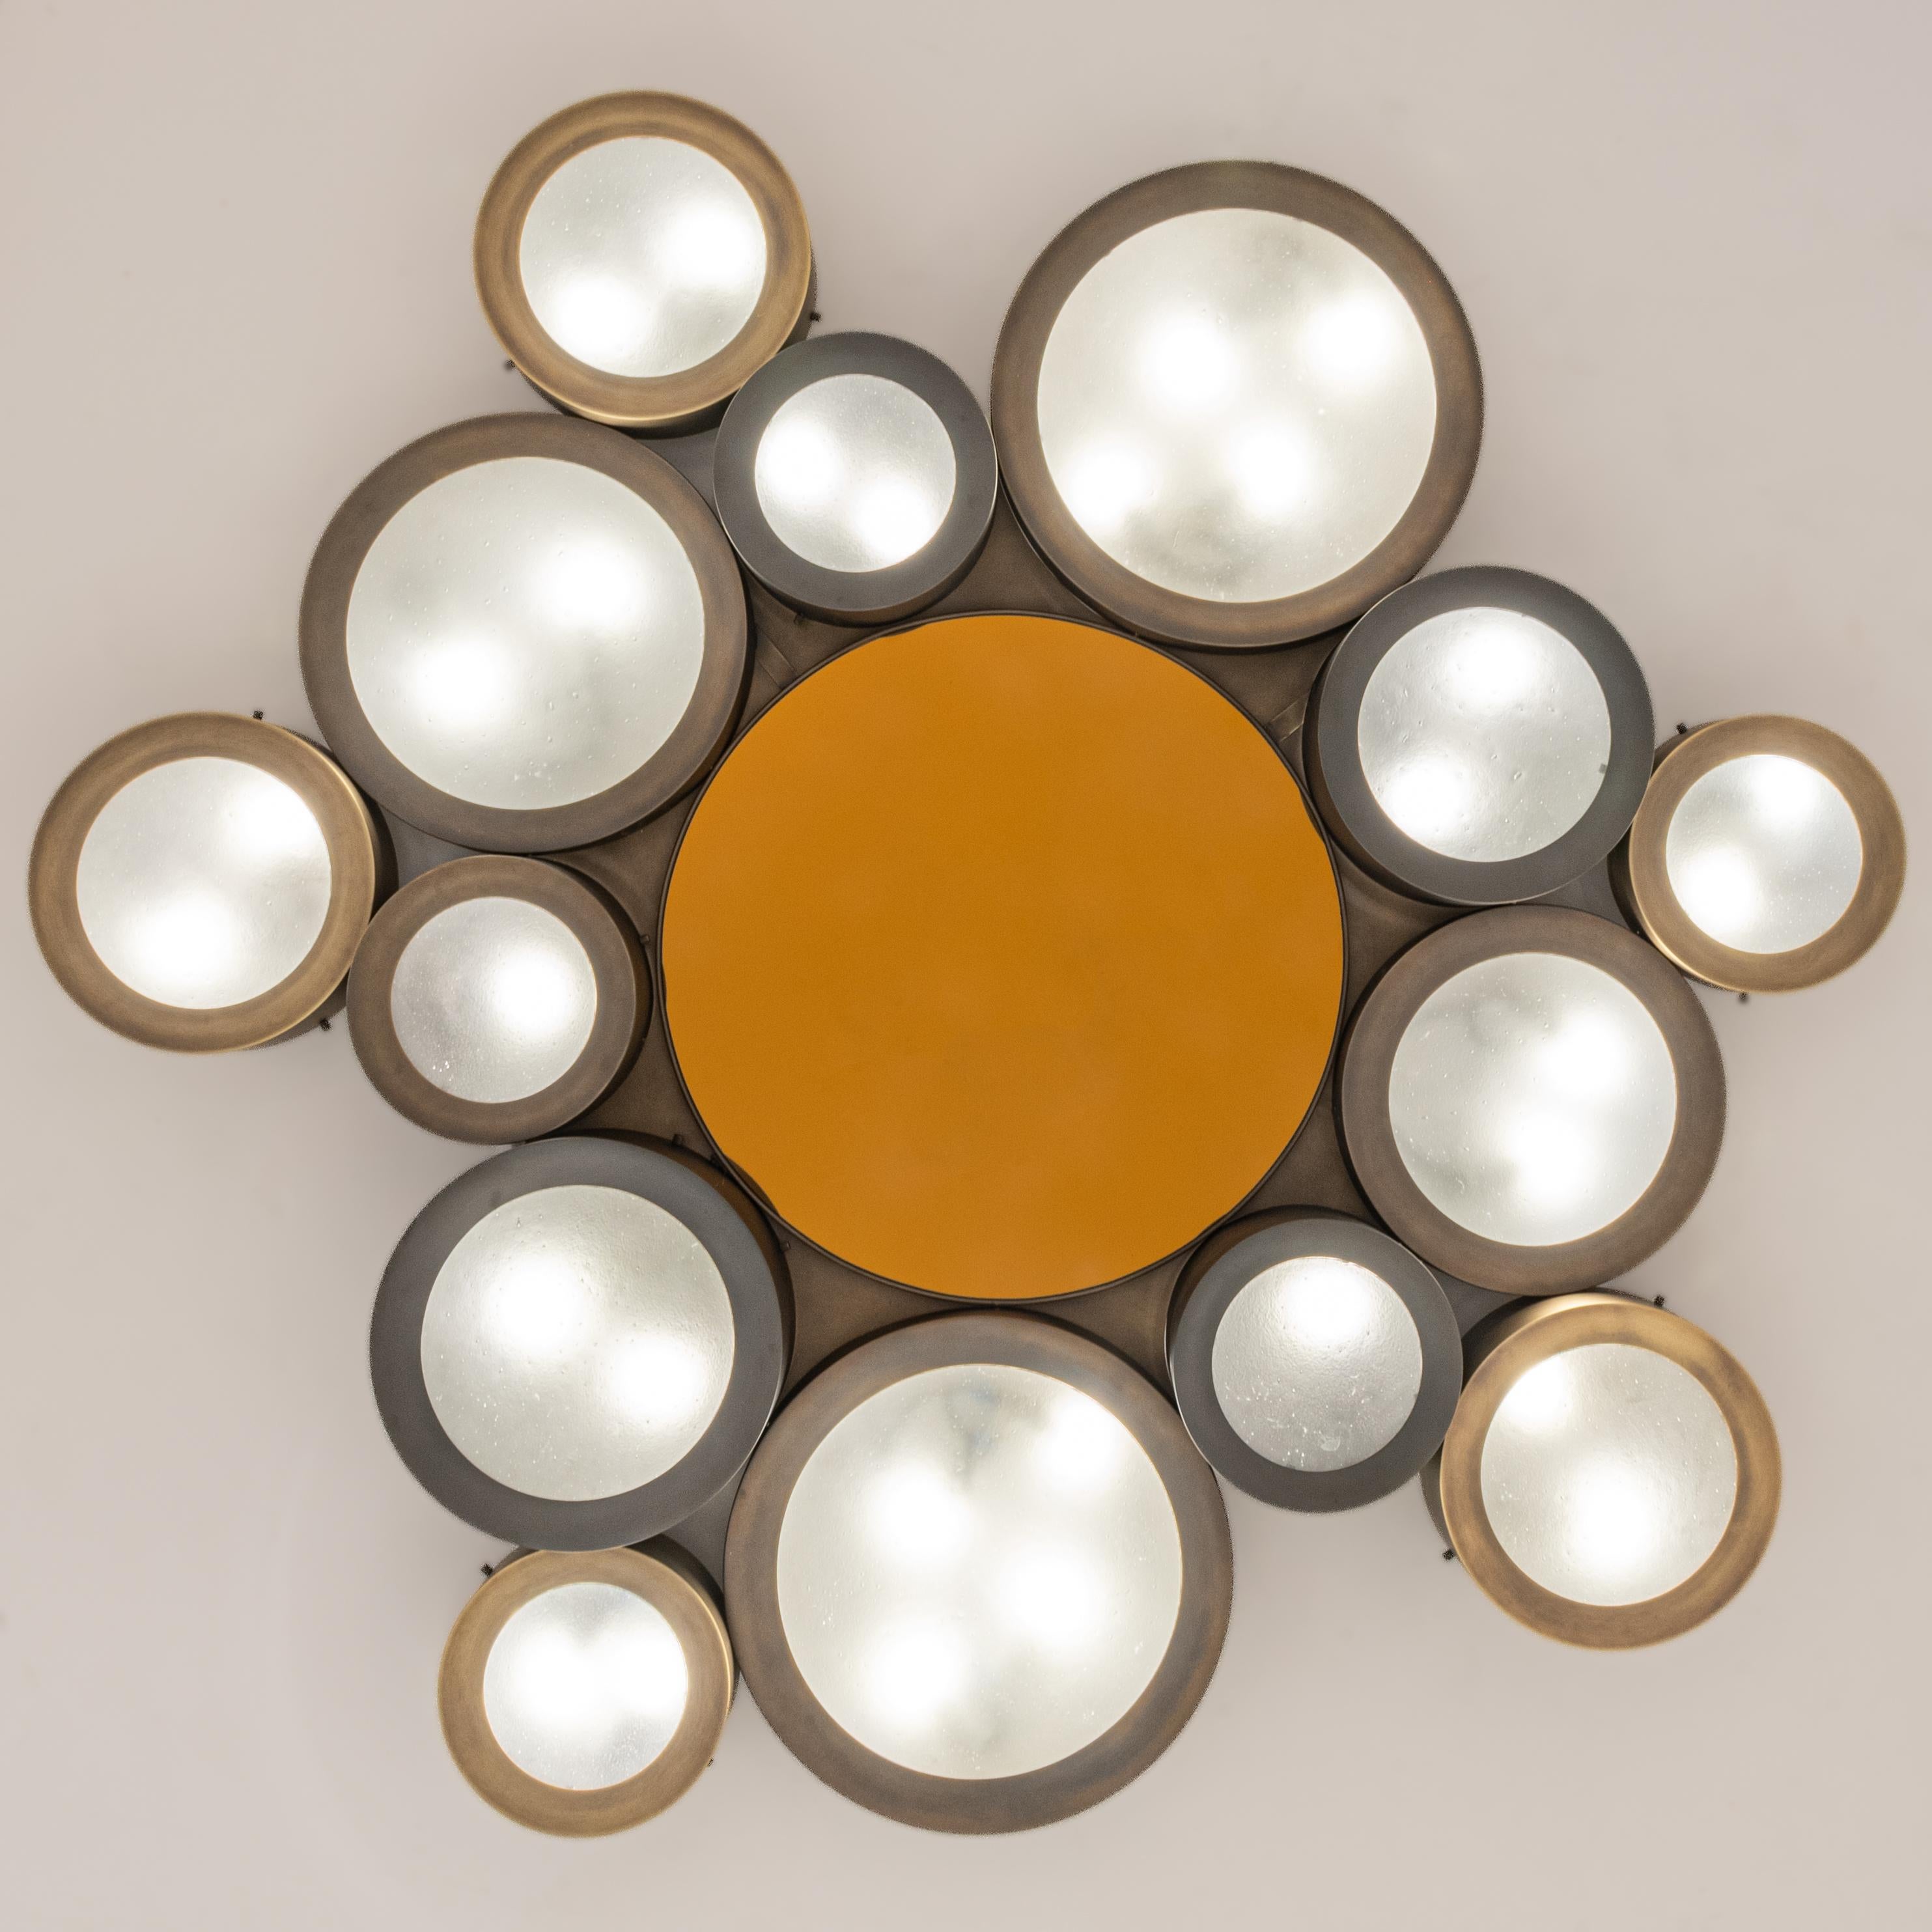 Helios 66 Ceiling Light by Gaspare Asaro-Satin Brass and Satin Nickel Finish In New Condition For Sale In New York, NY